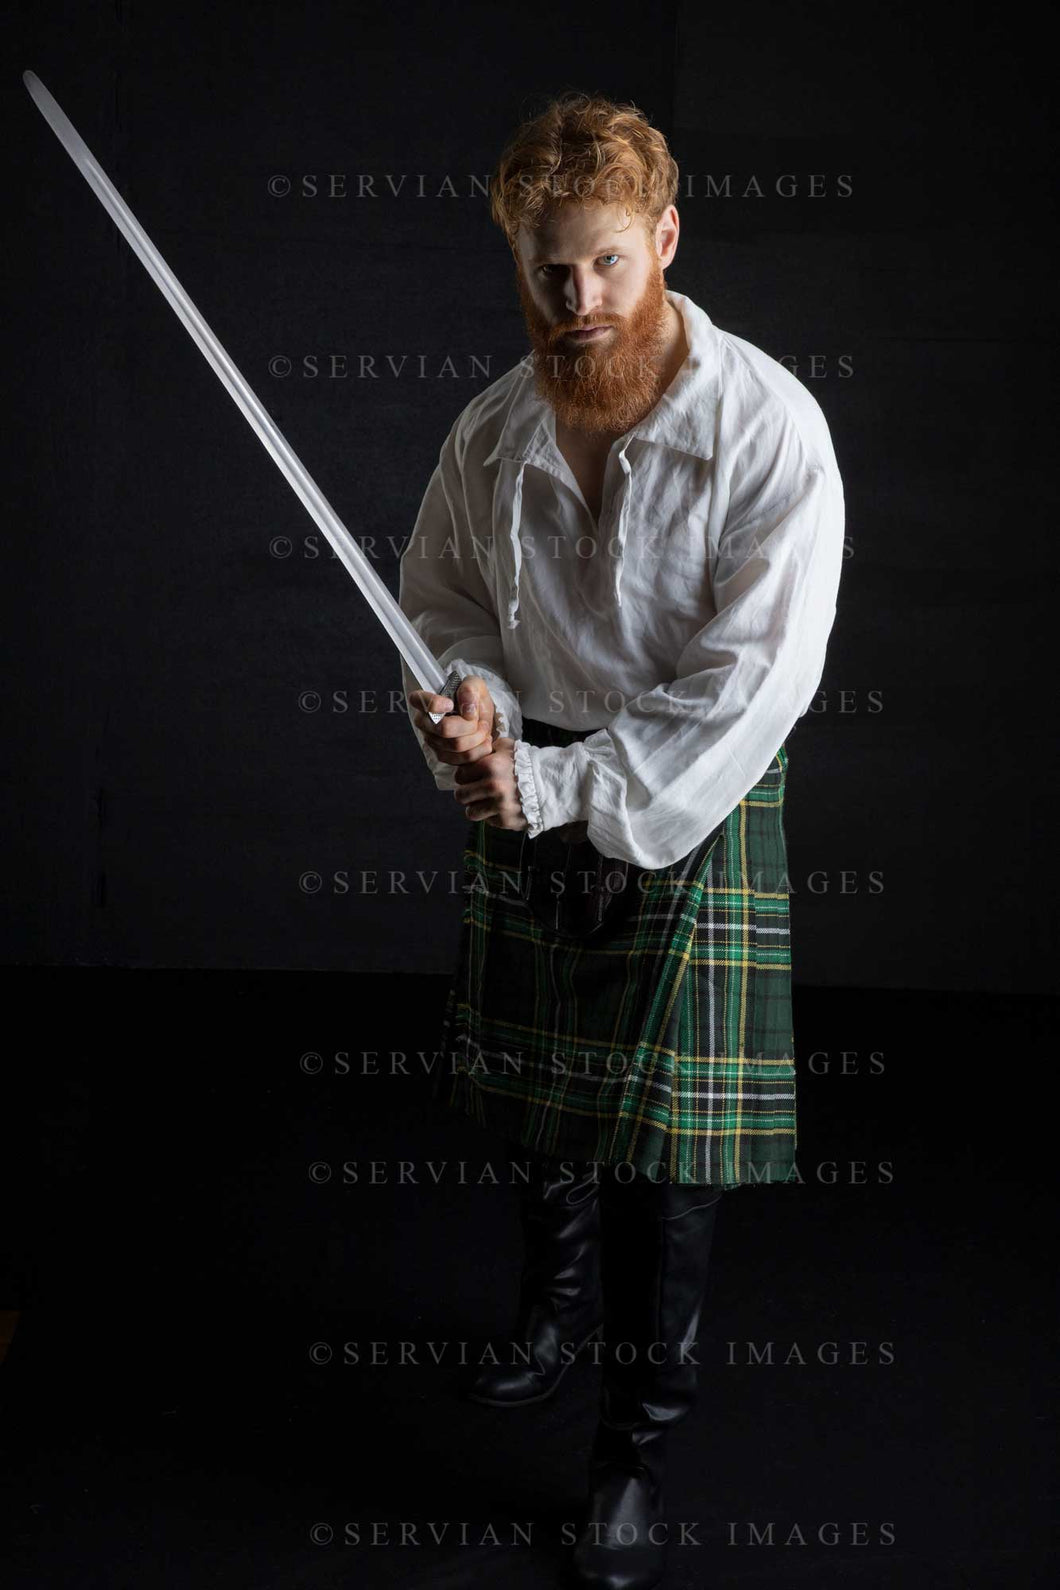 Scotsman with red hair and beard wearing a kilt and linen shirt against a black backdrop (Luke 3251)